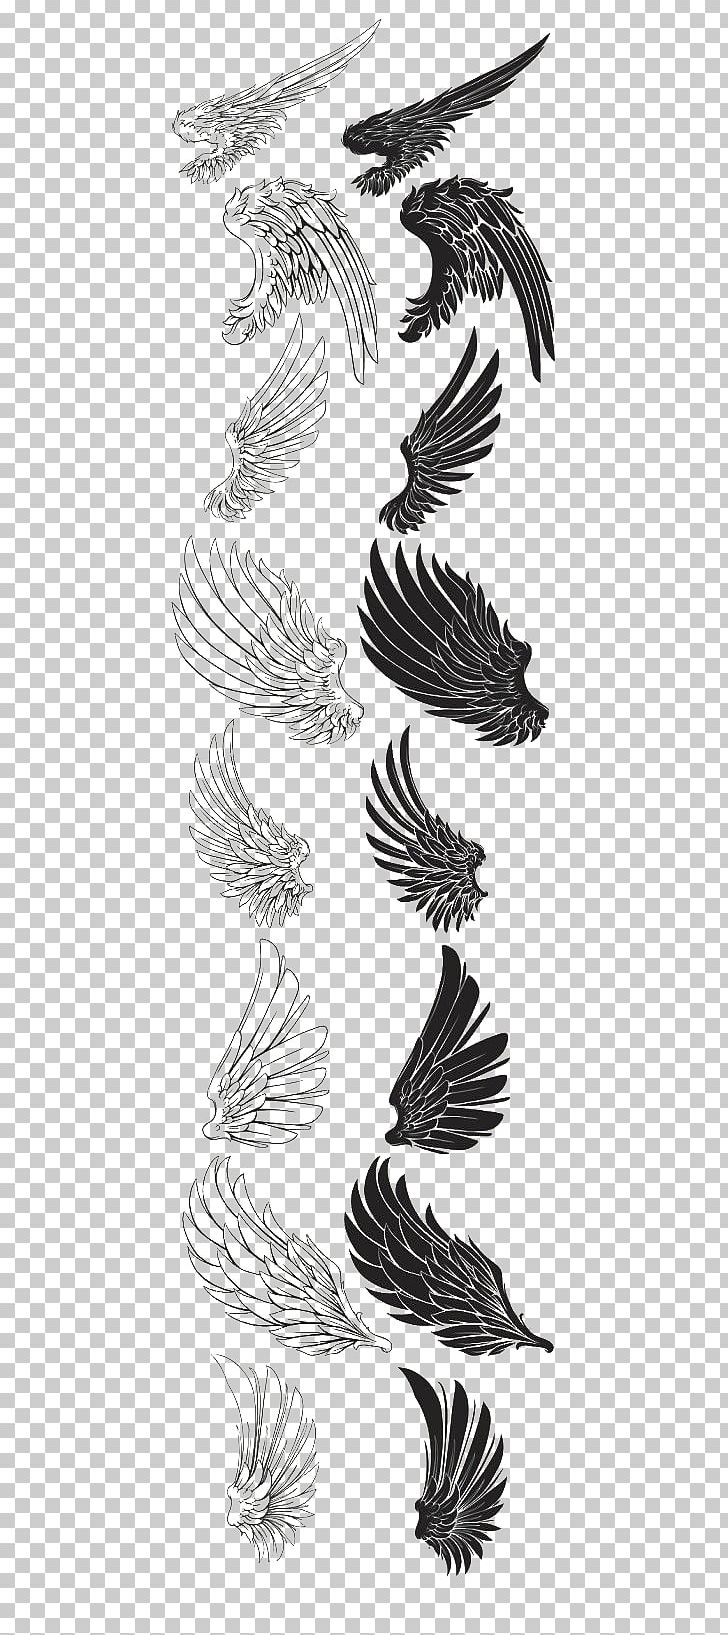 Drawing Brush Feather PNG, Clipart, Angel Wing, Angel Wings, Animal, Animal Brush, Animals Free PNG Download